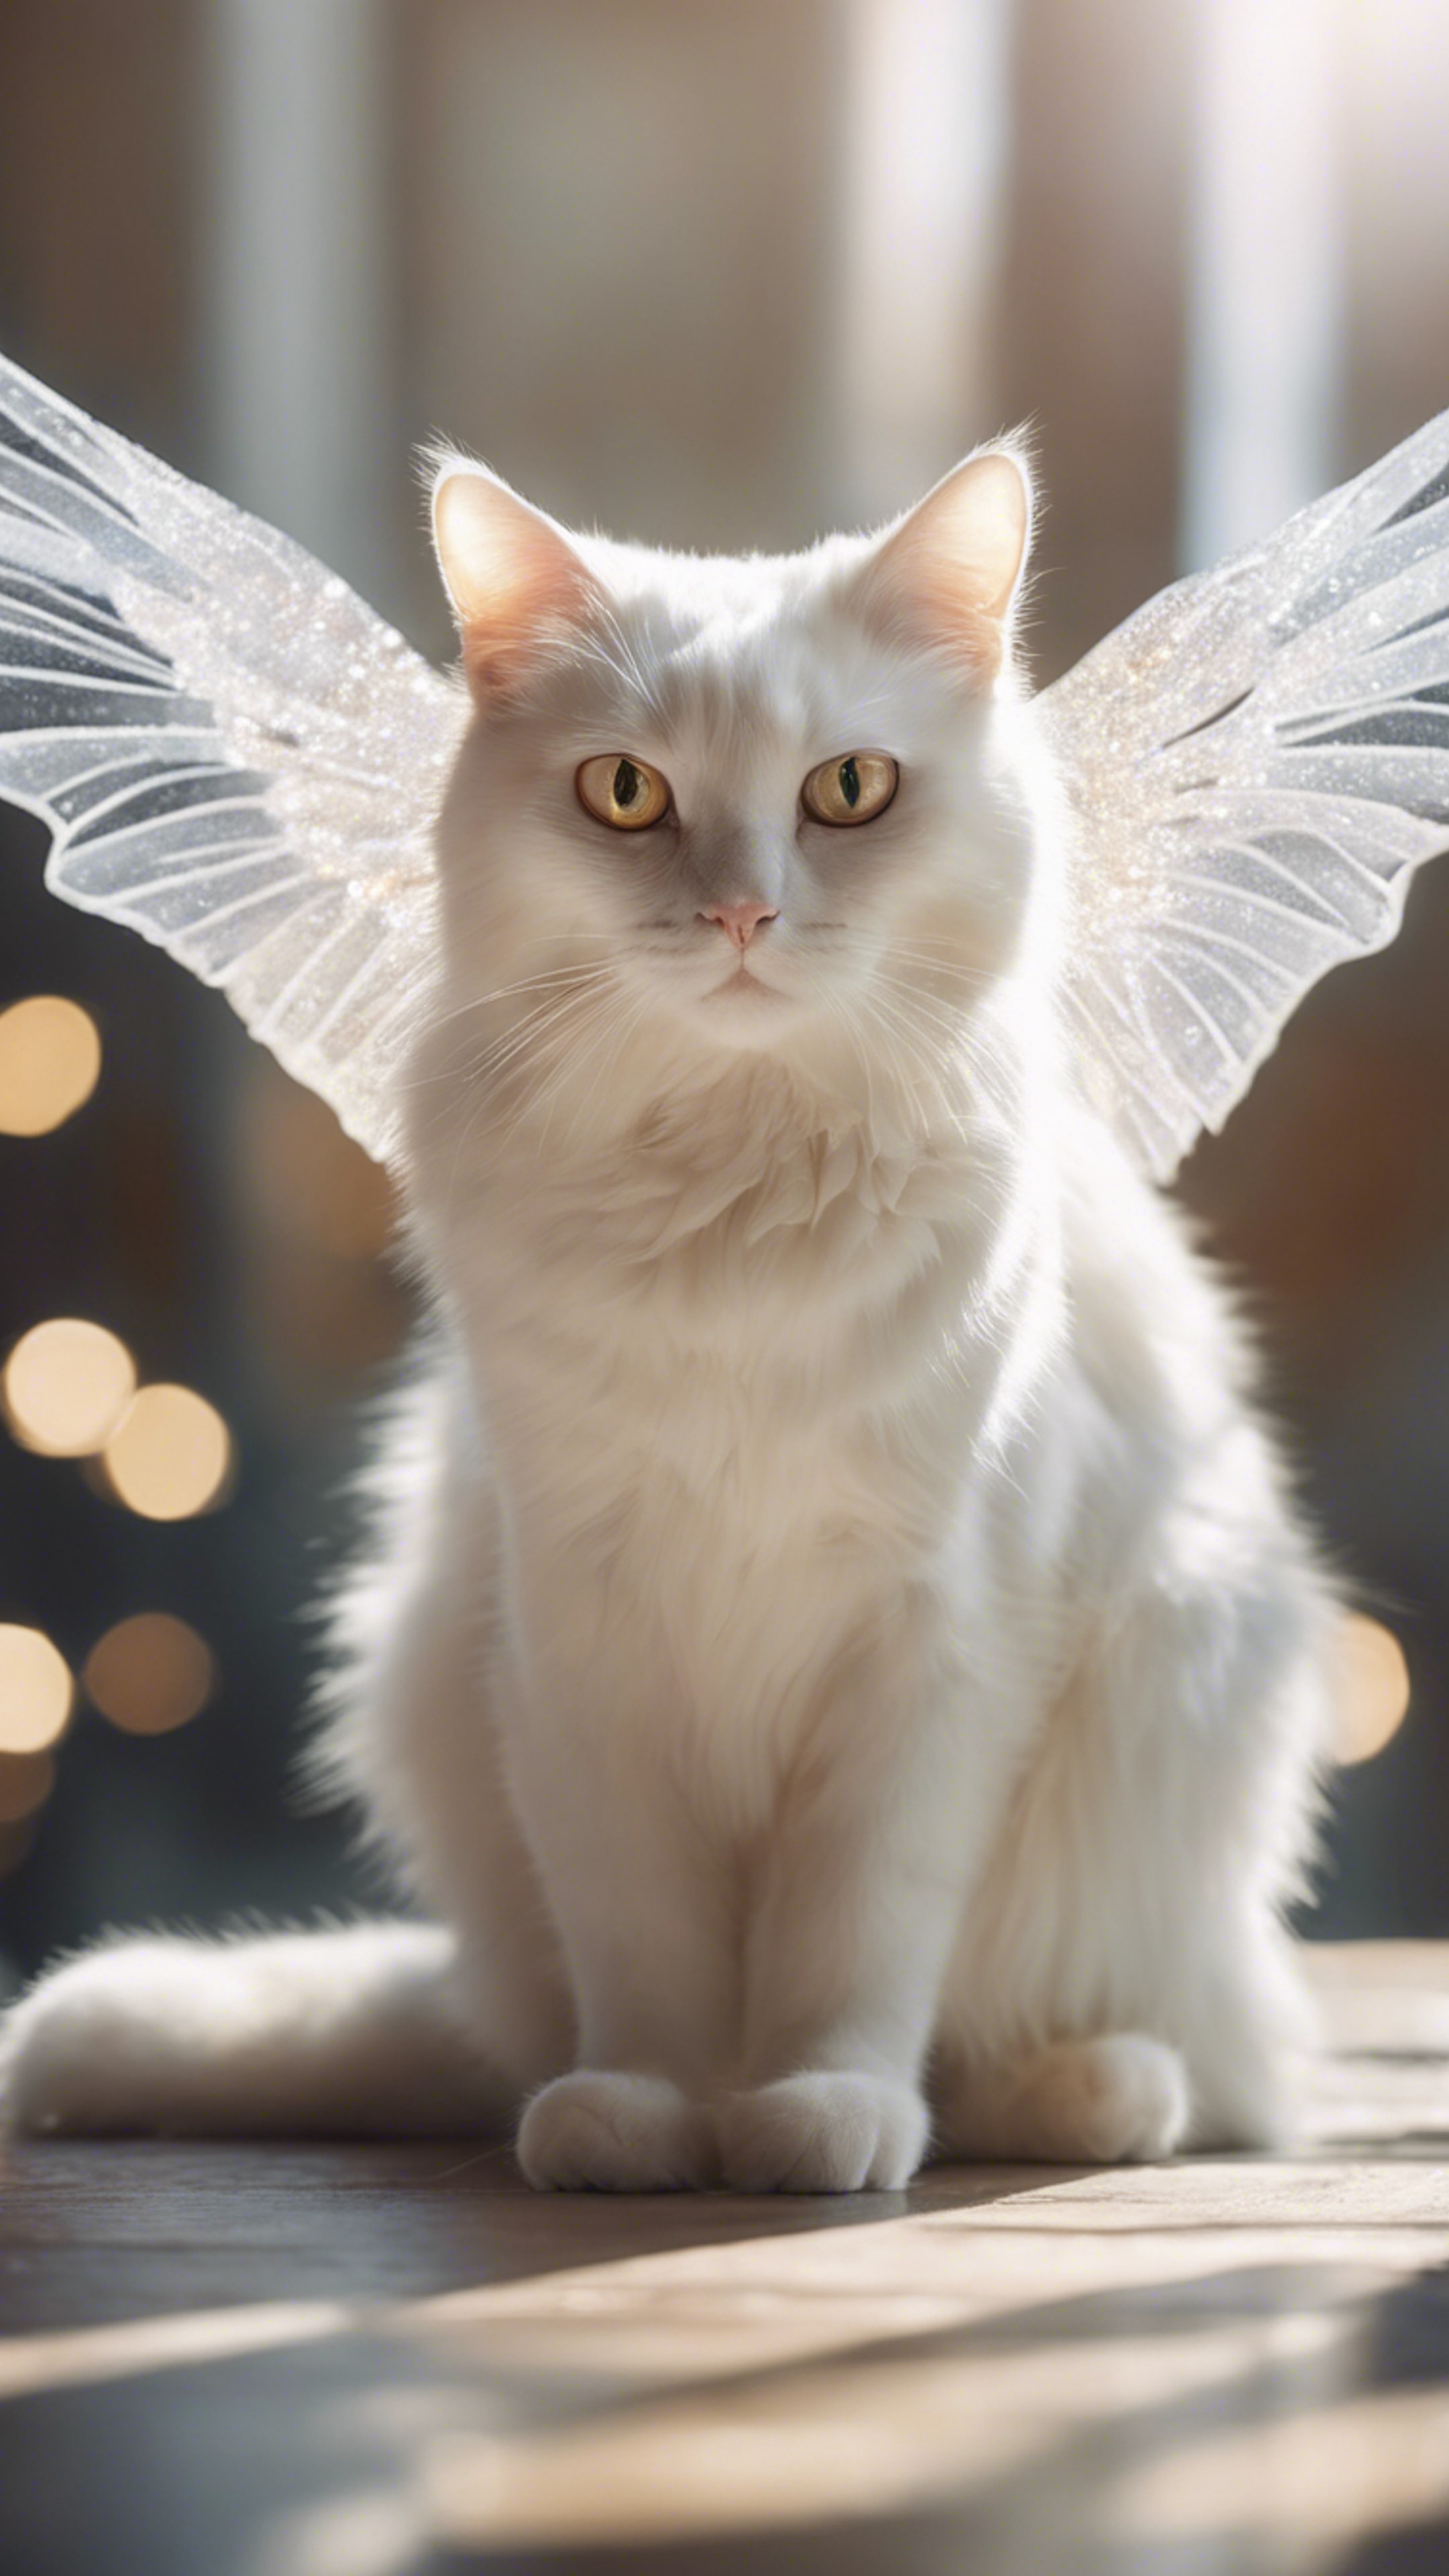 An angelic white cat with shimmering wings of radiant light. Wallpaper[3c11d42234a34aa69153]